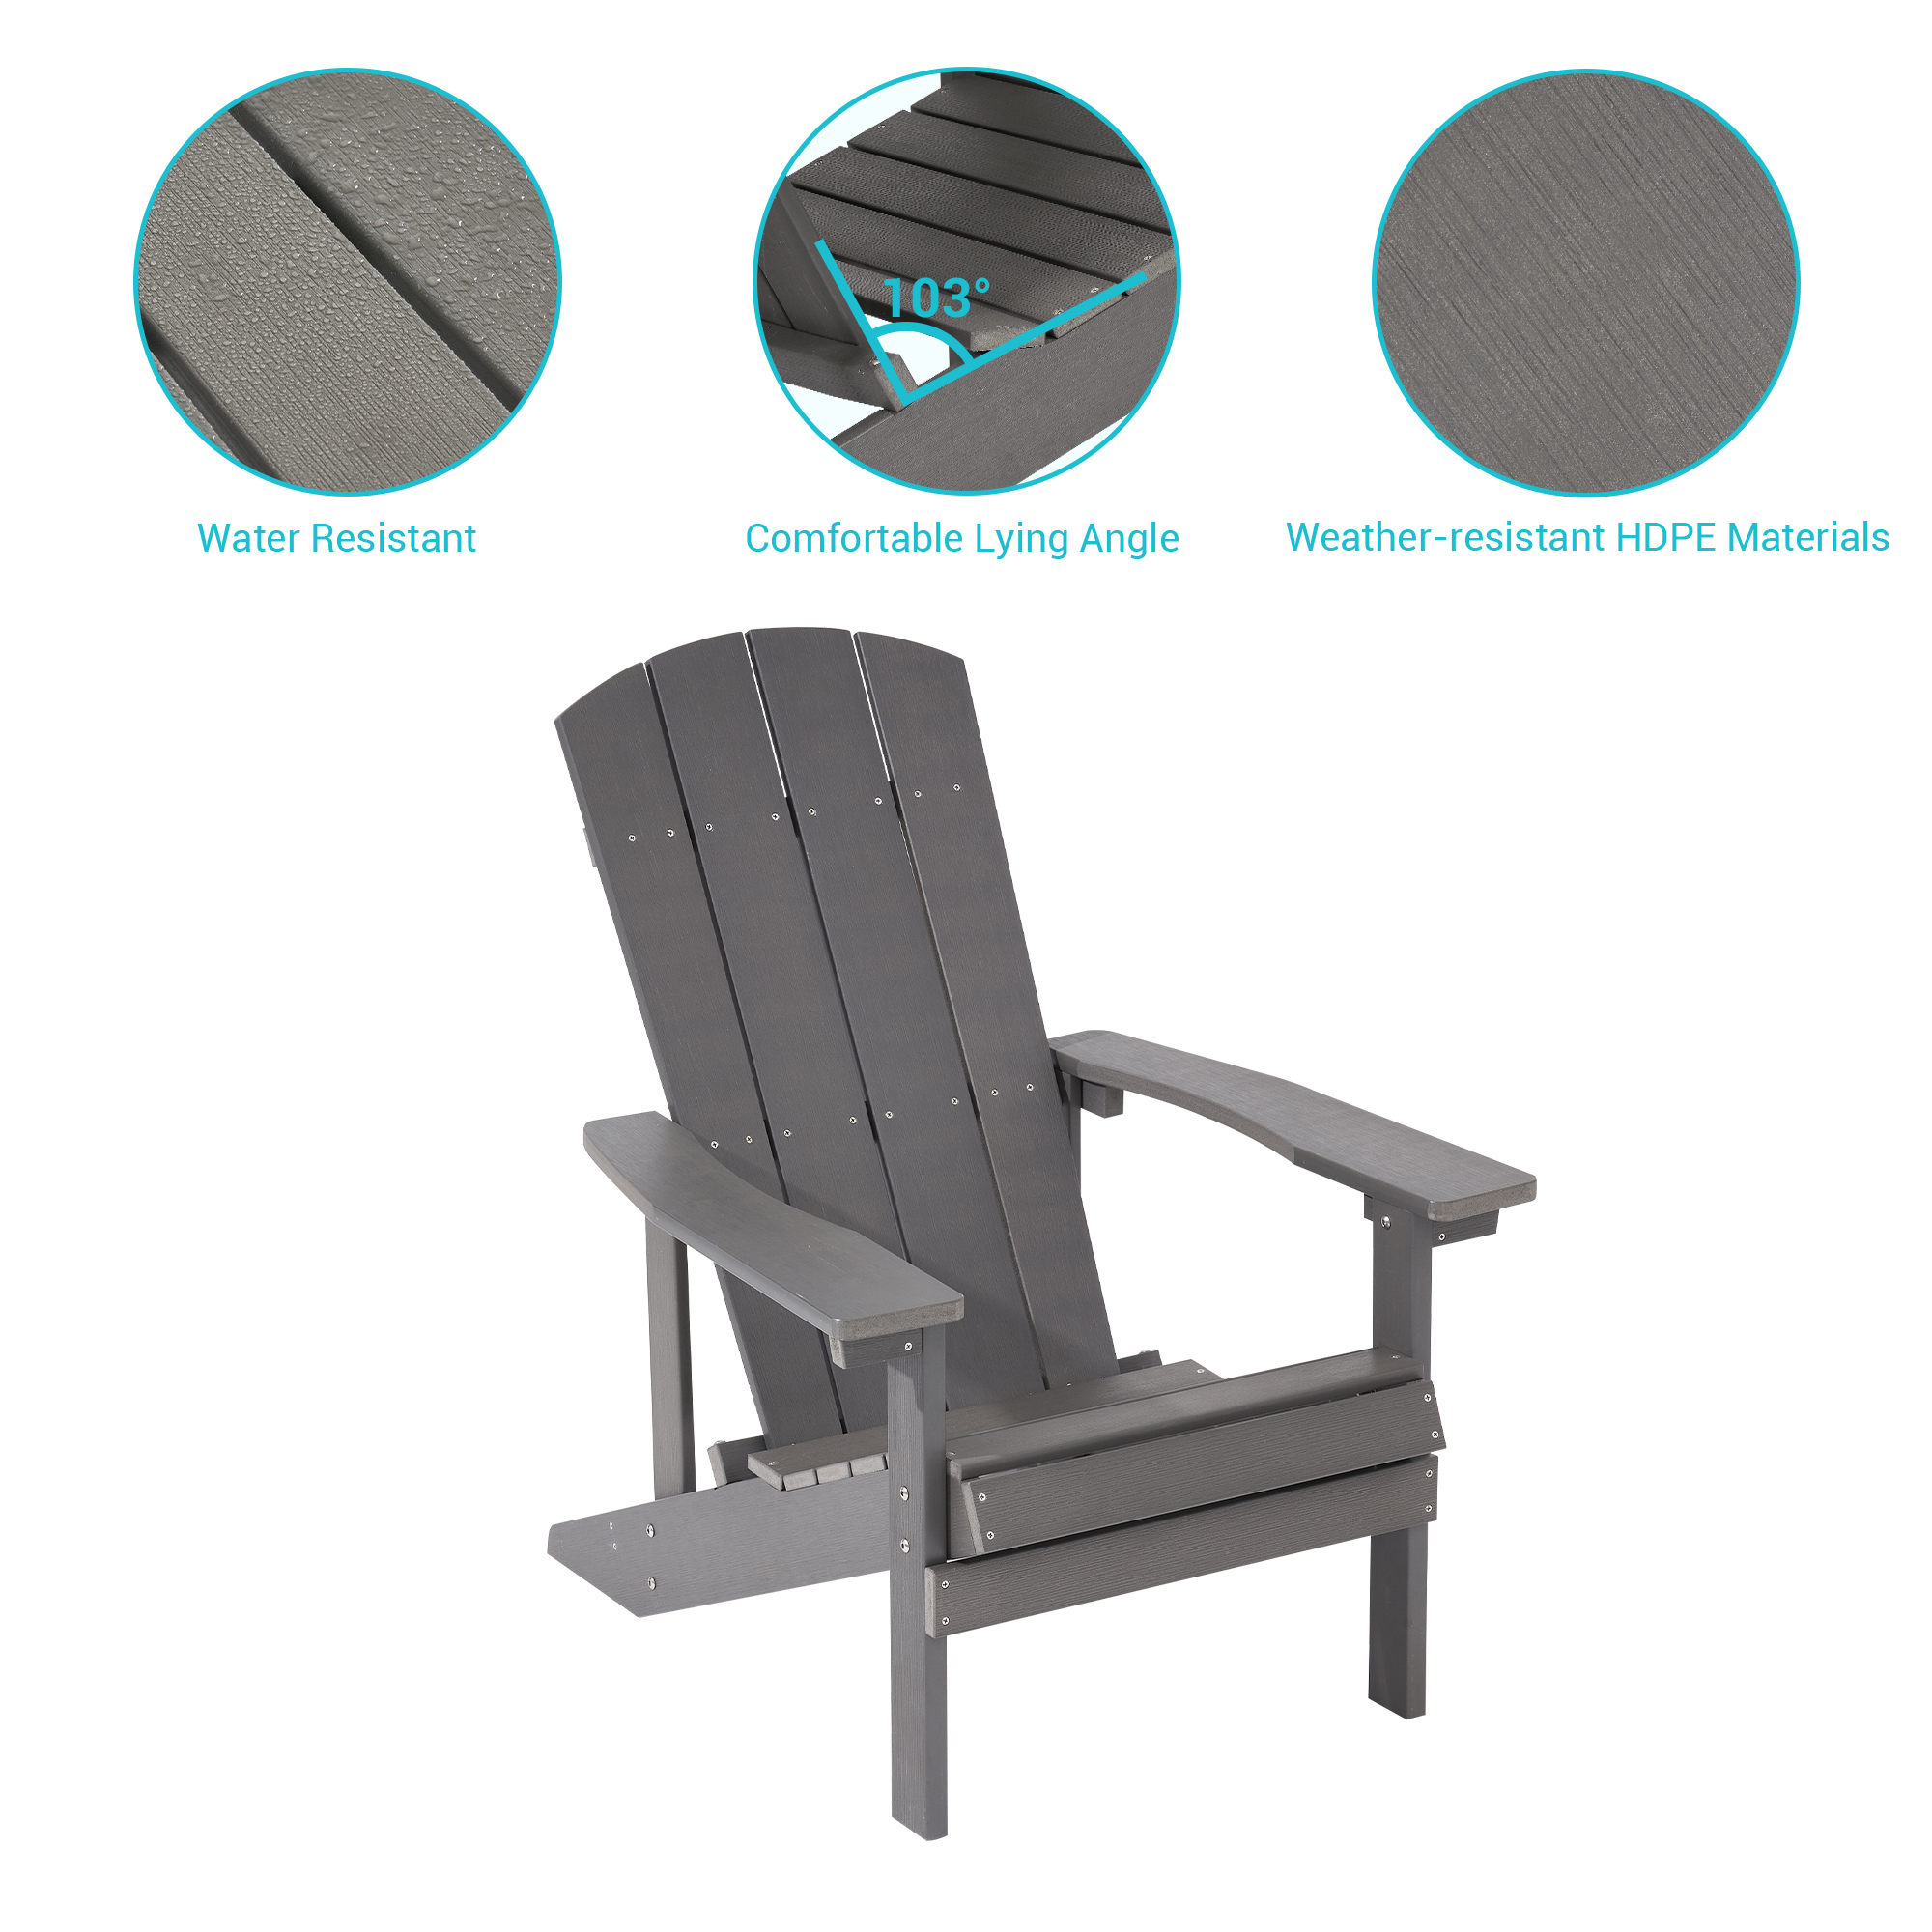 CHYVARY 1 Peak Adirondack Chair, Fire Pit Outdoor Patio Furniture,Gray - image 4 of 7